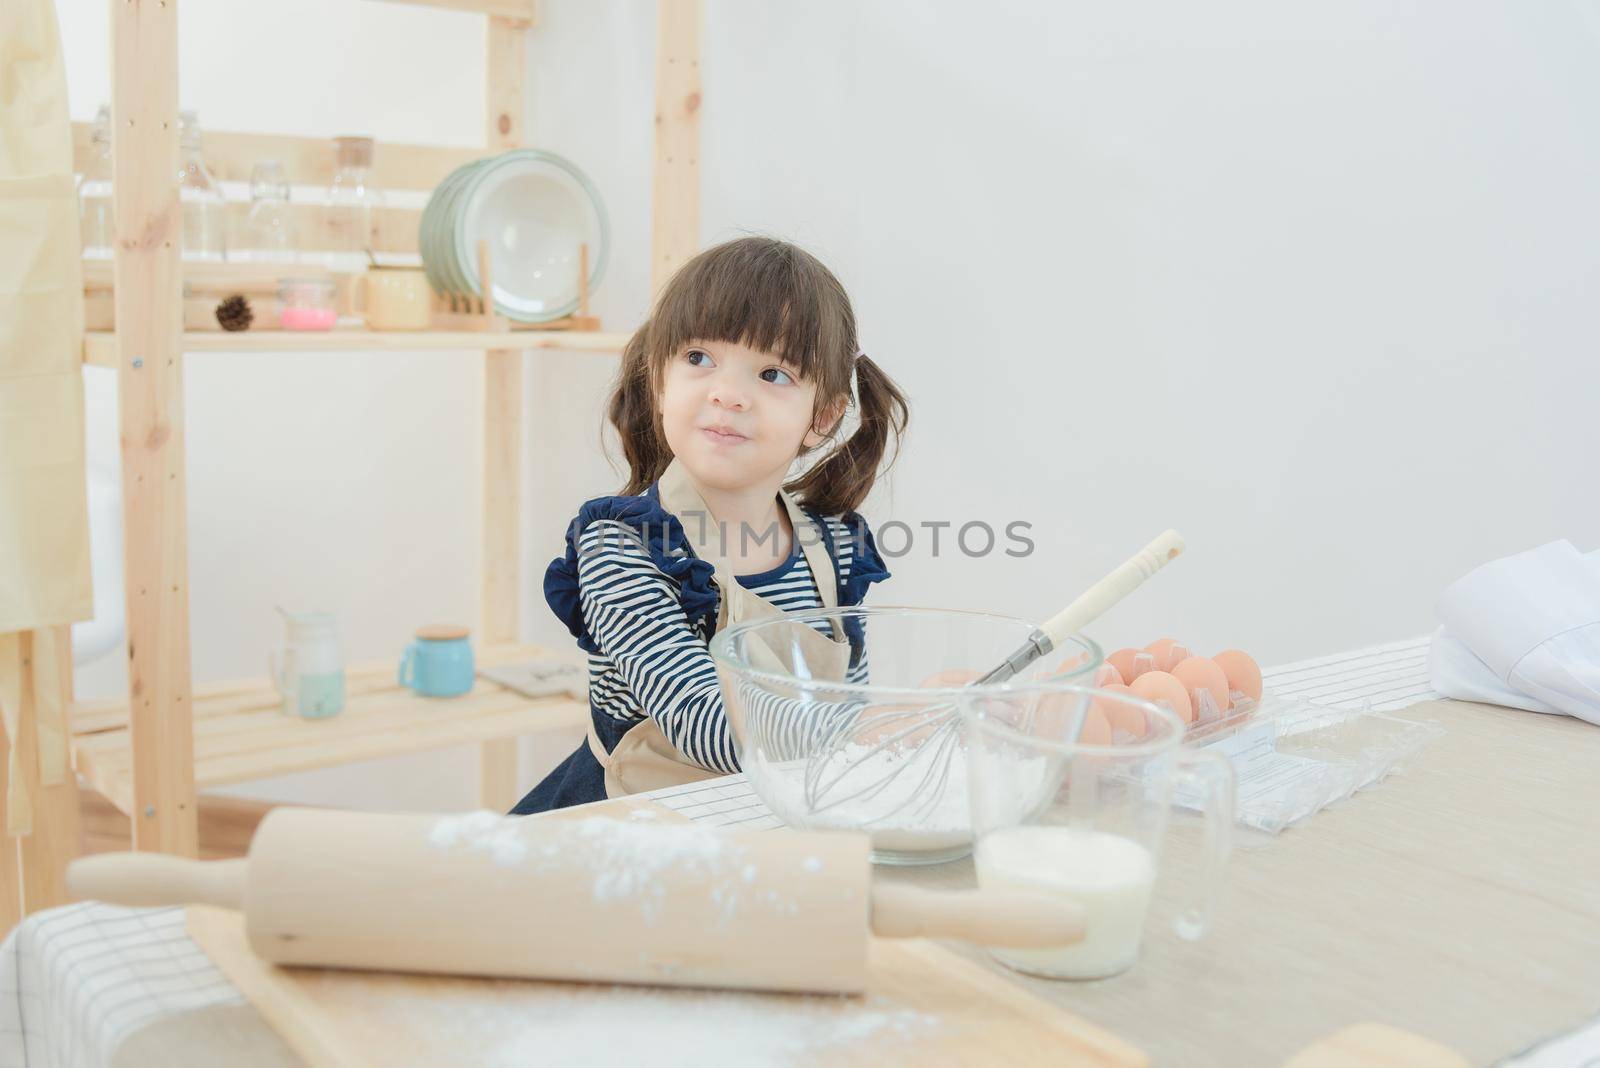 Asian children waiting her mother for preparing the dough to make a cake in the kitchen room on vacation.Photo series of Happy family concept.